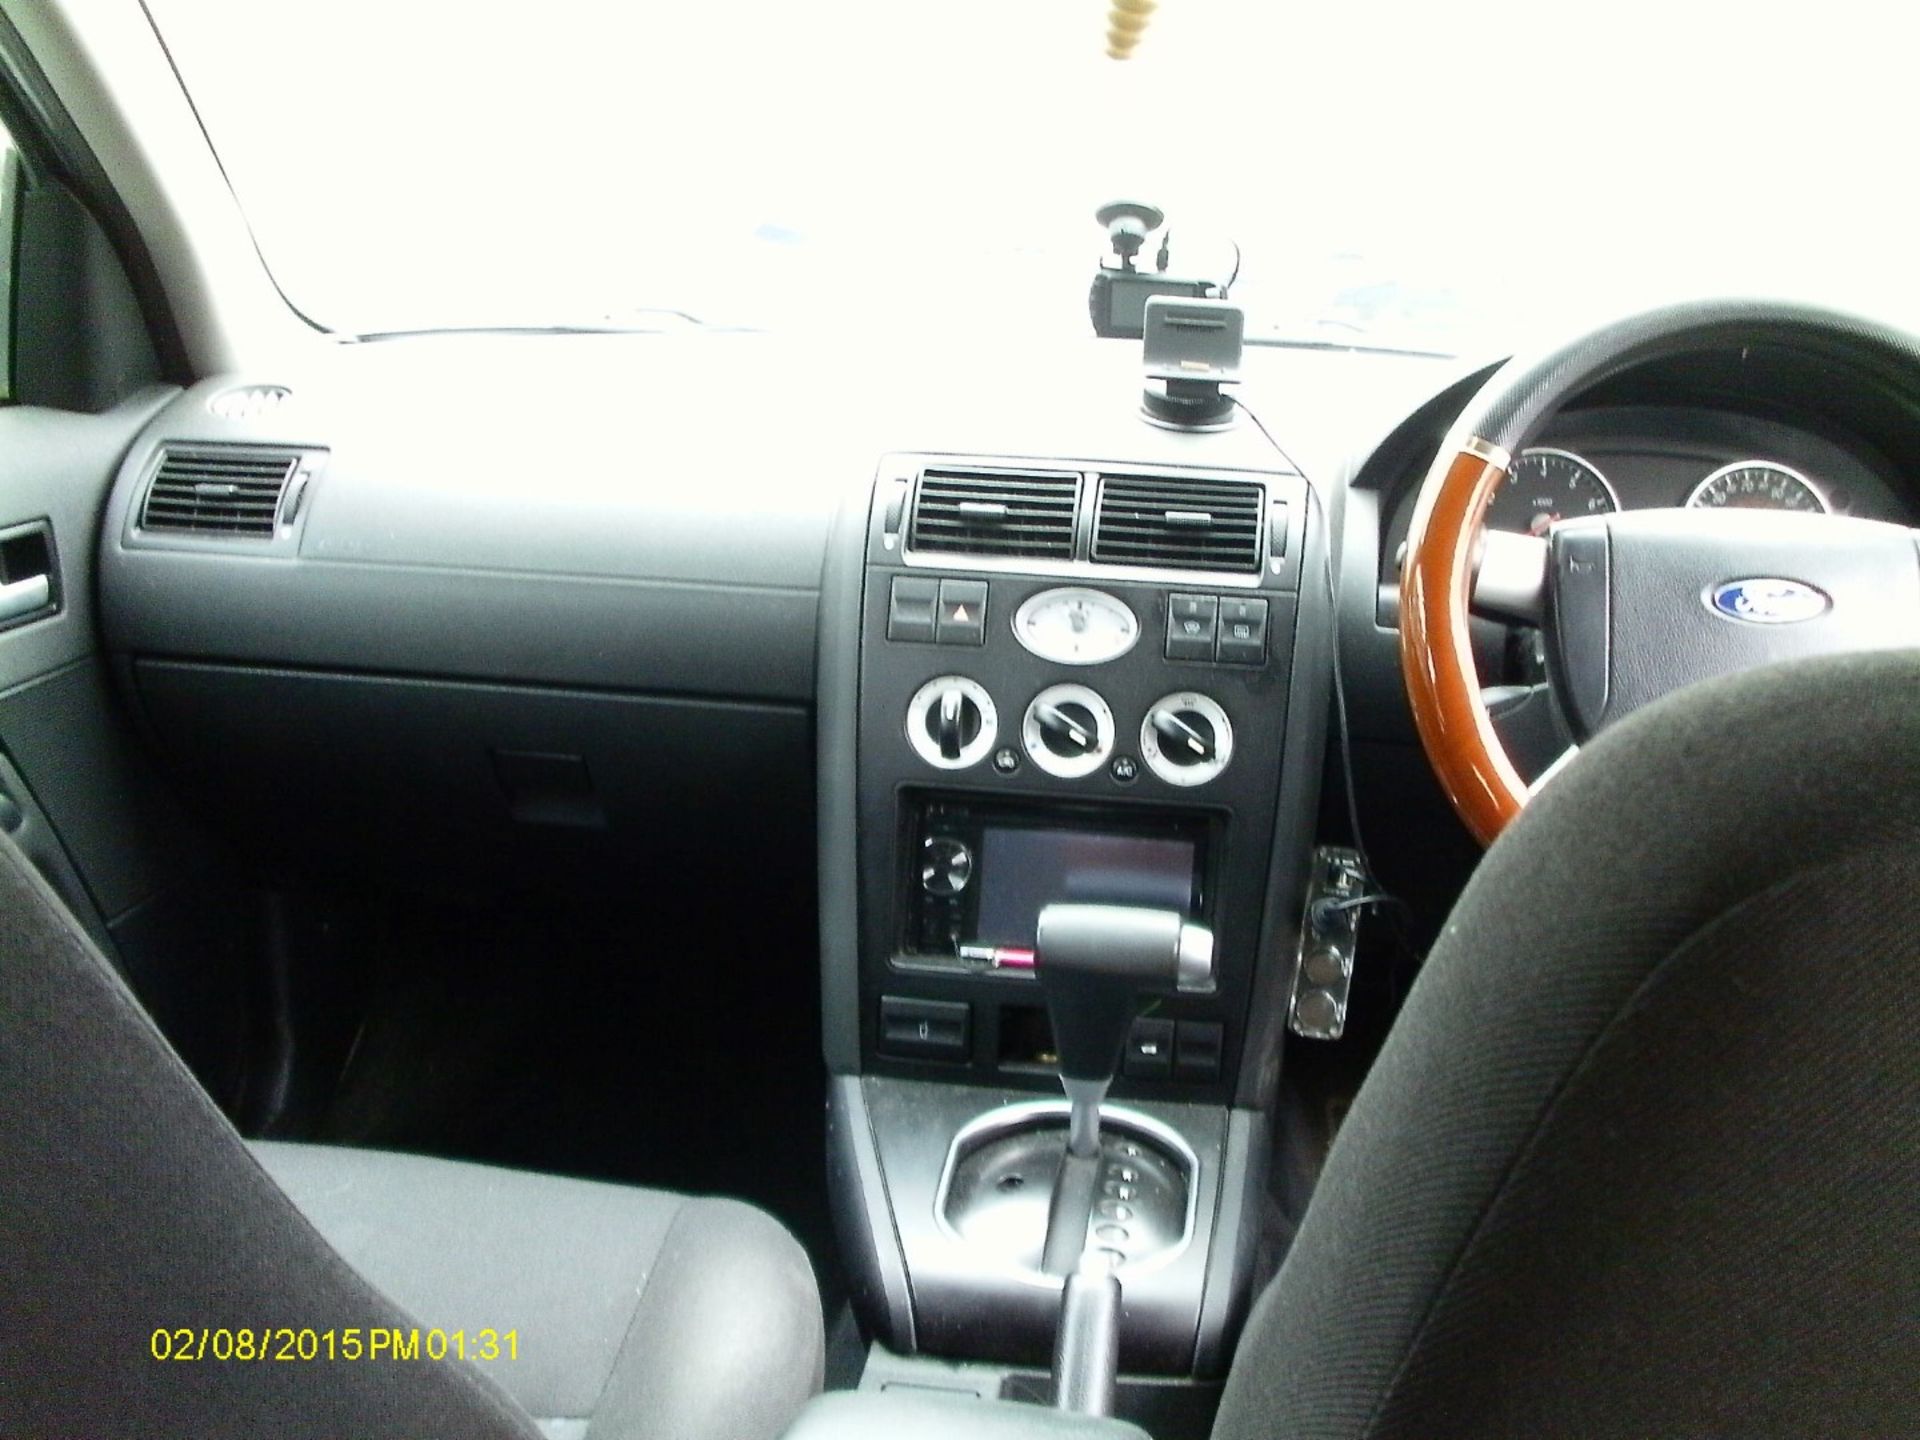 1 x Ford Mondeo - 2003 - Automatic - Petrol - 139,000 Miles - Features Include Chain Driven Cam - Image 7 of 10